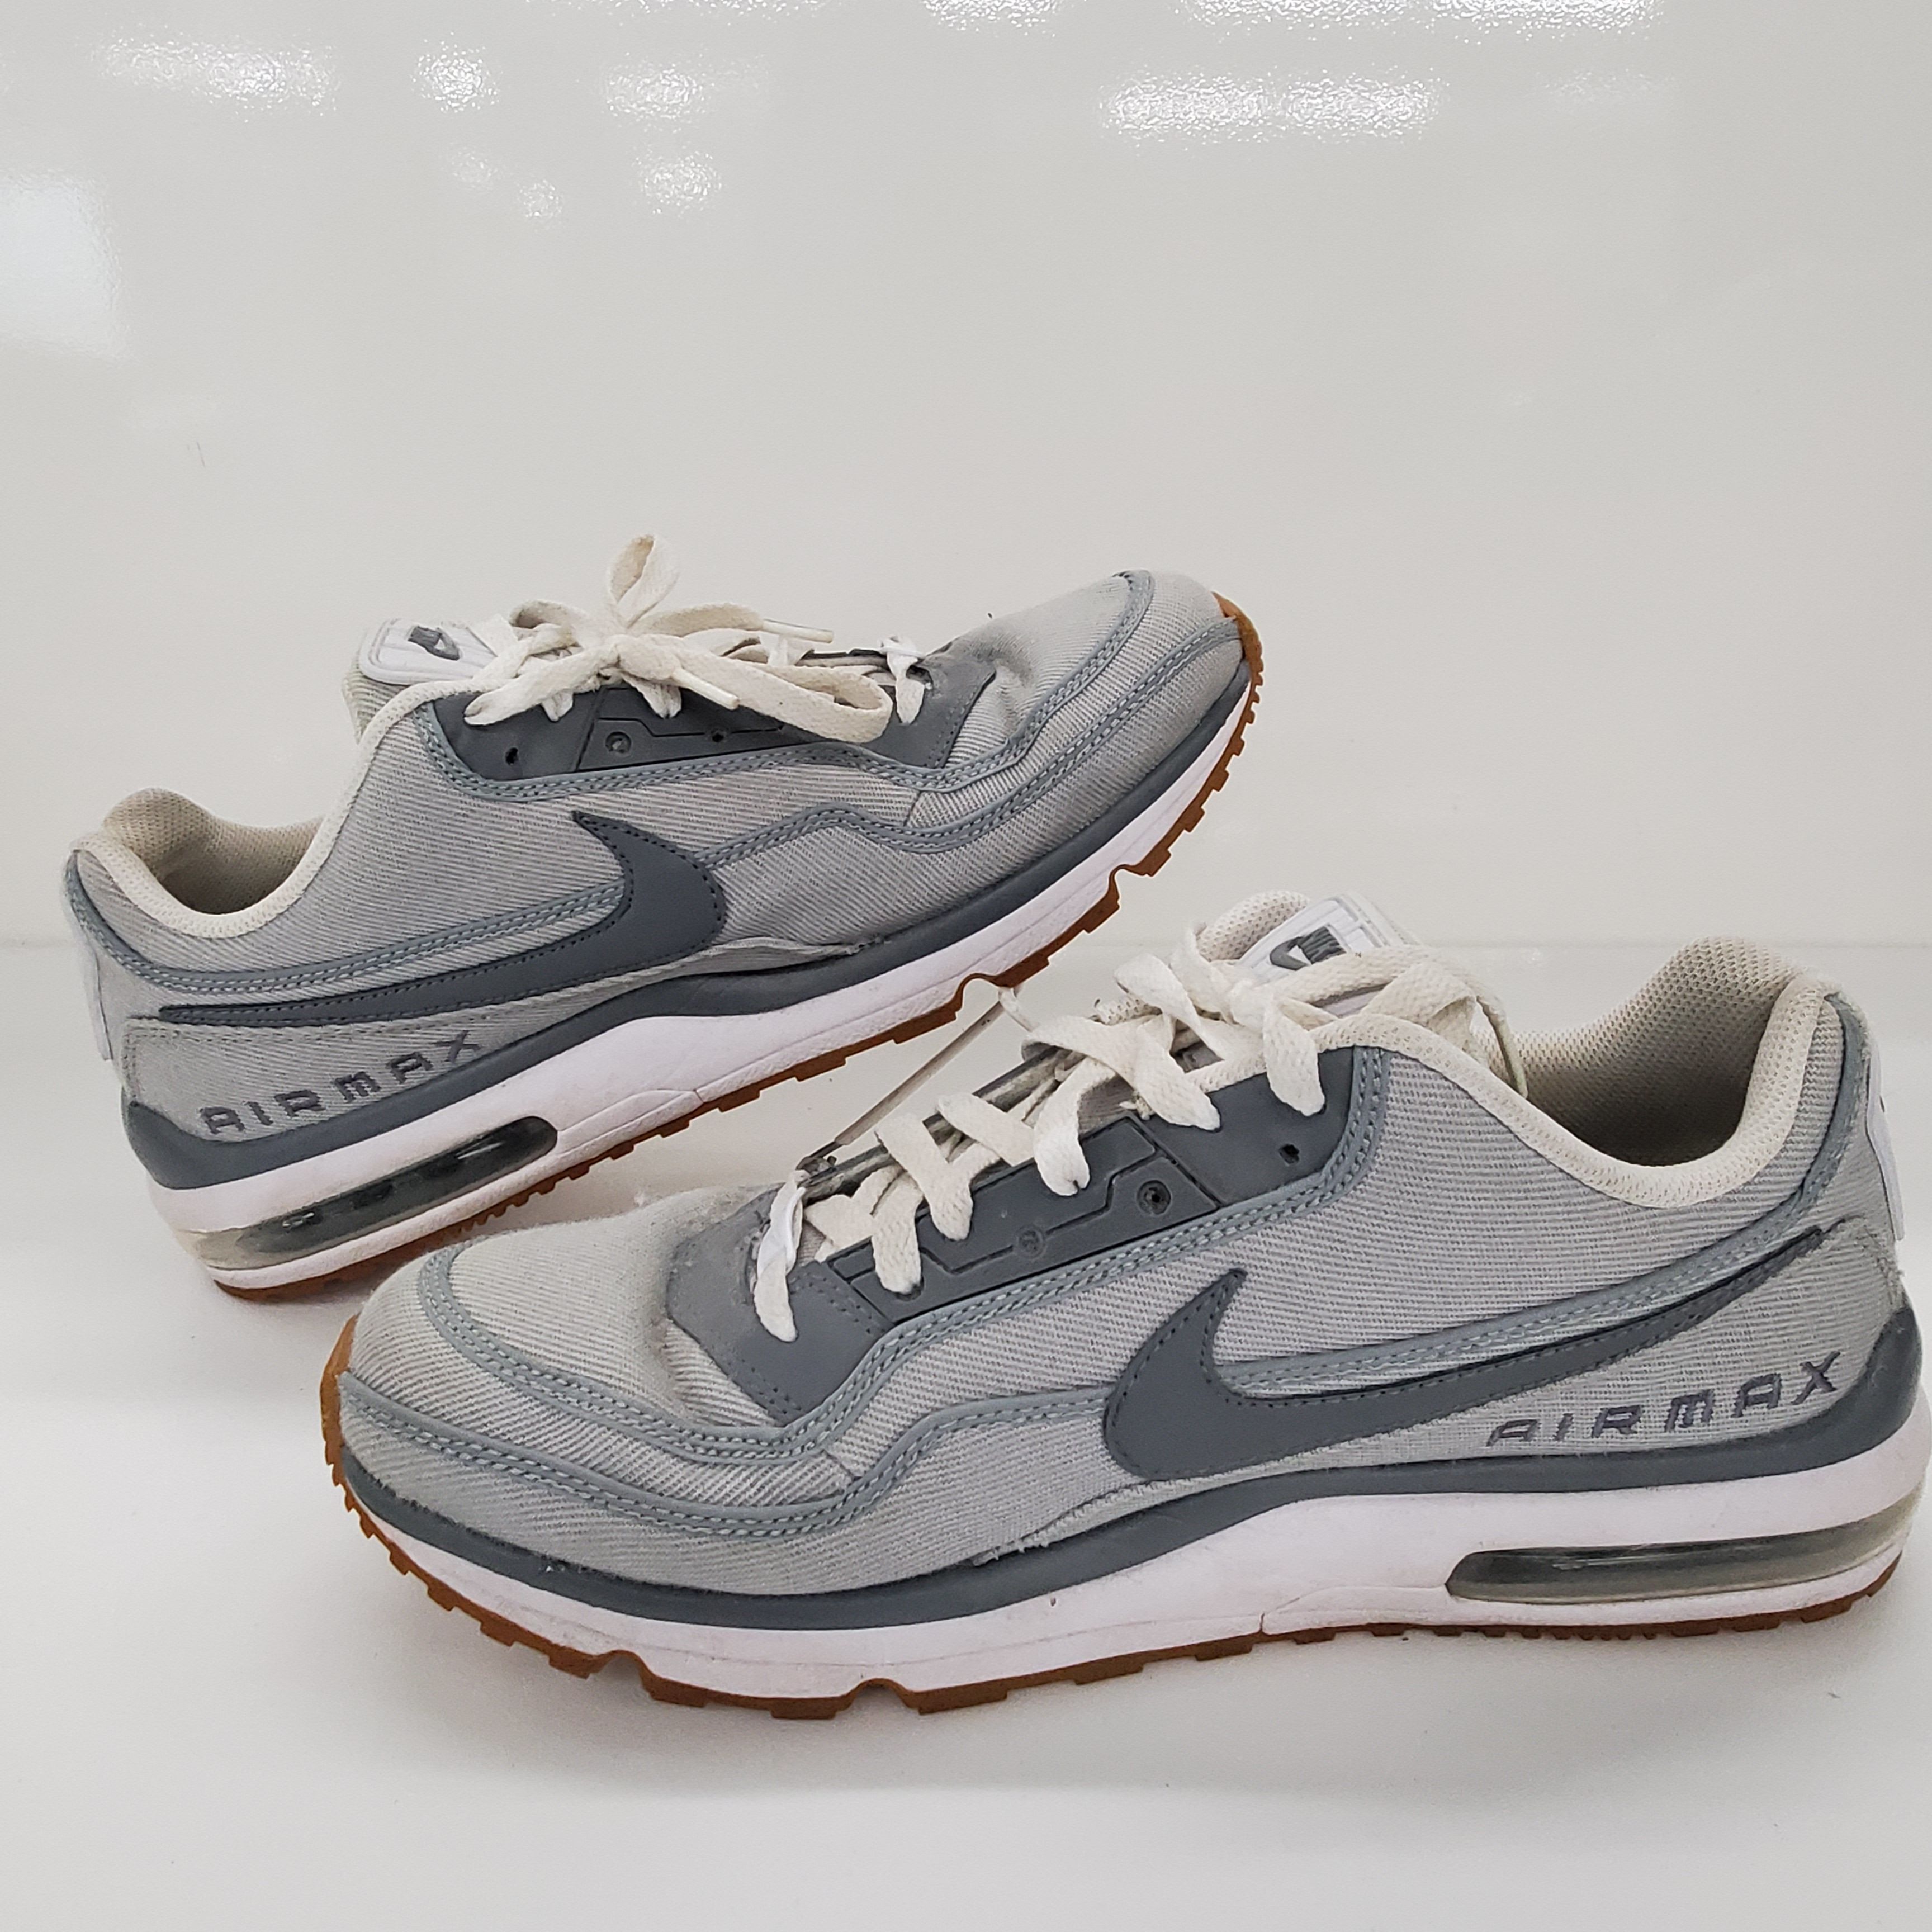 Buy the Nike Air Max LTD 3 TXT White Running Men's Shoes Size 12-746379 ...